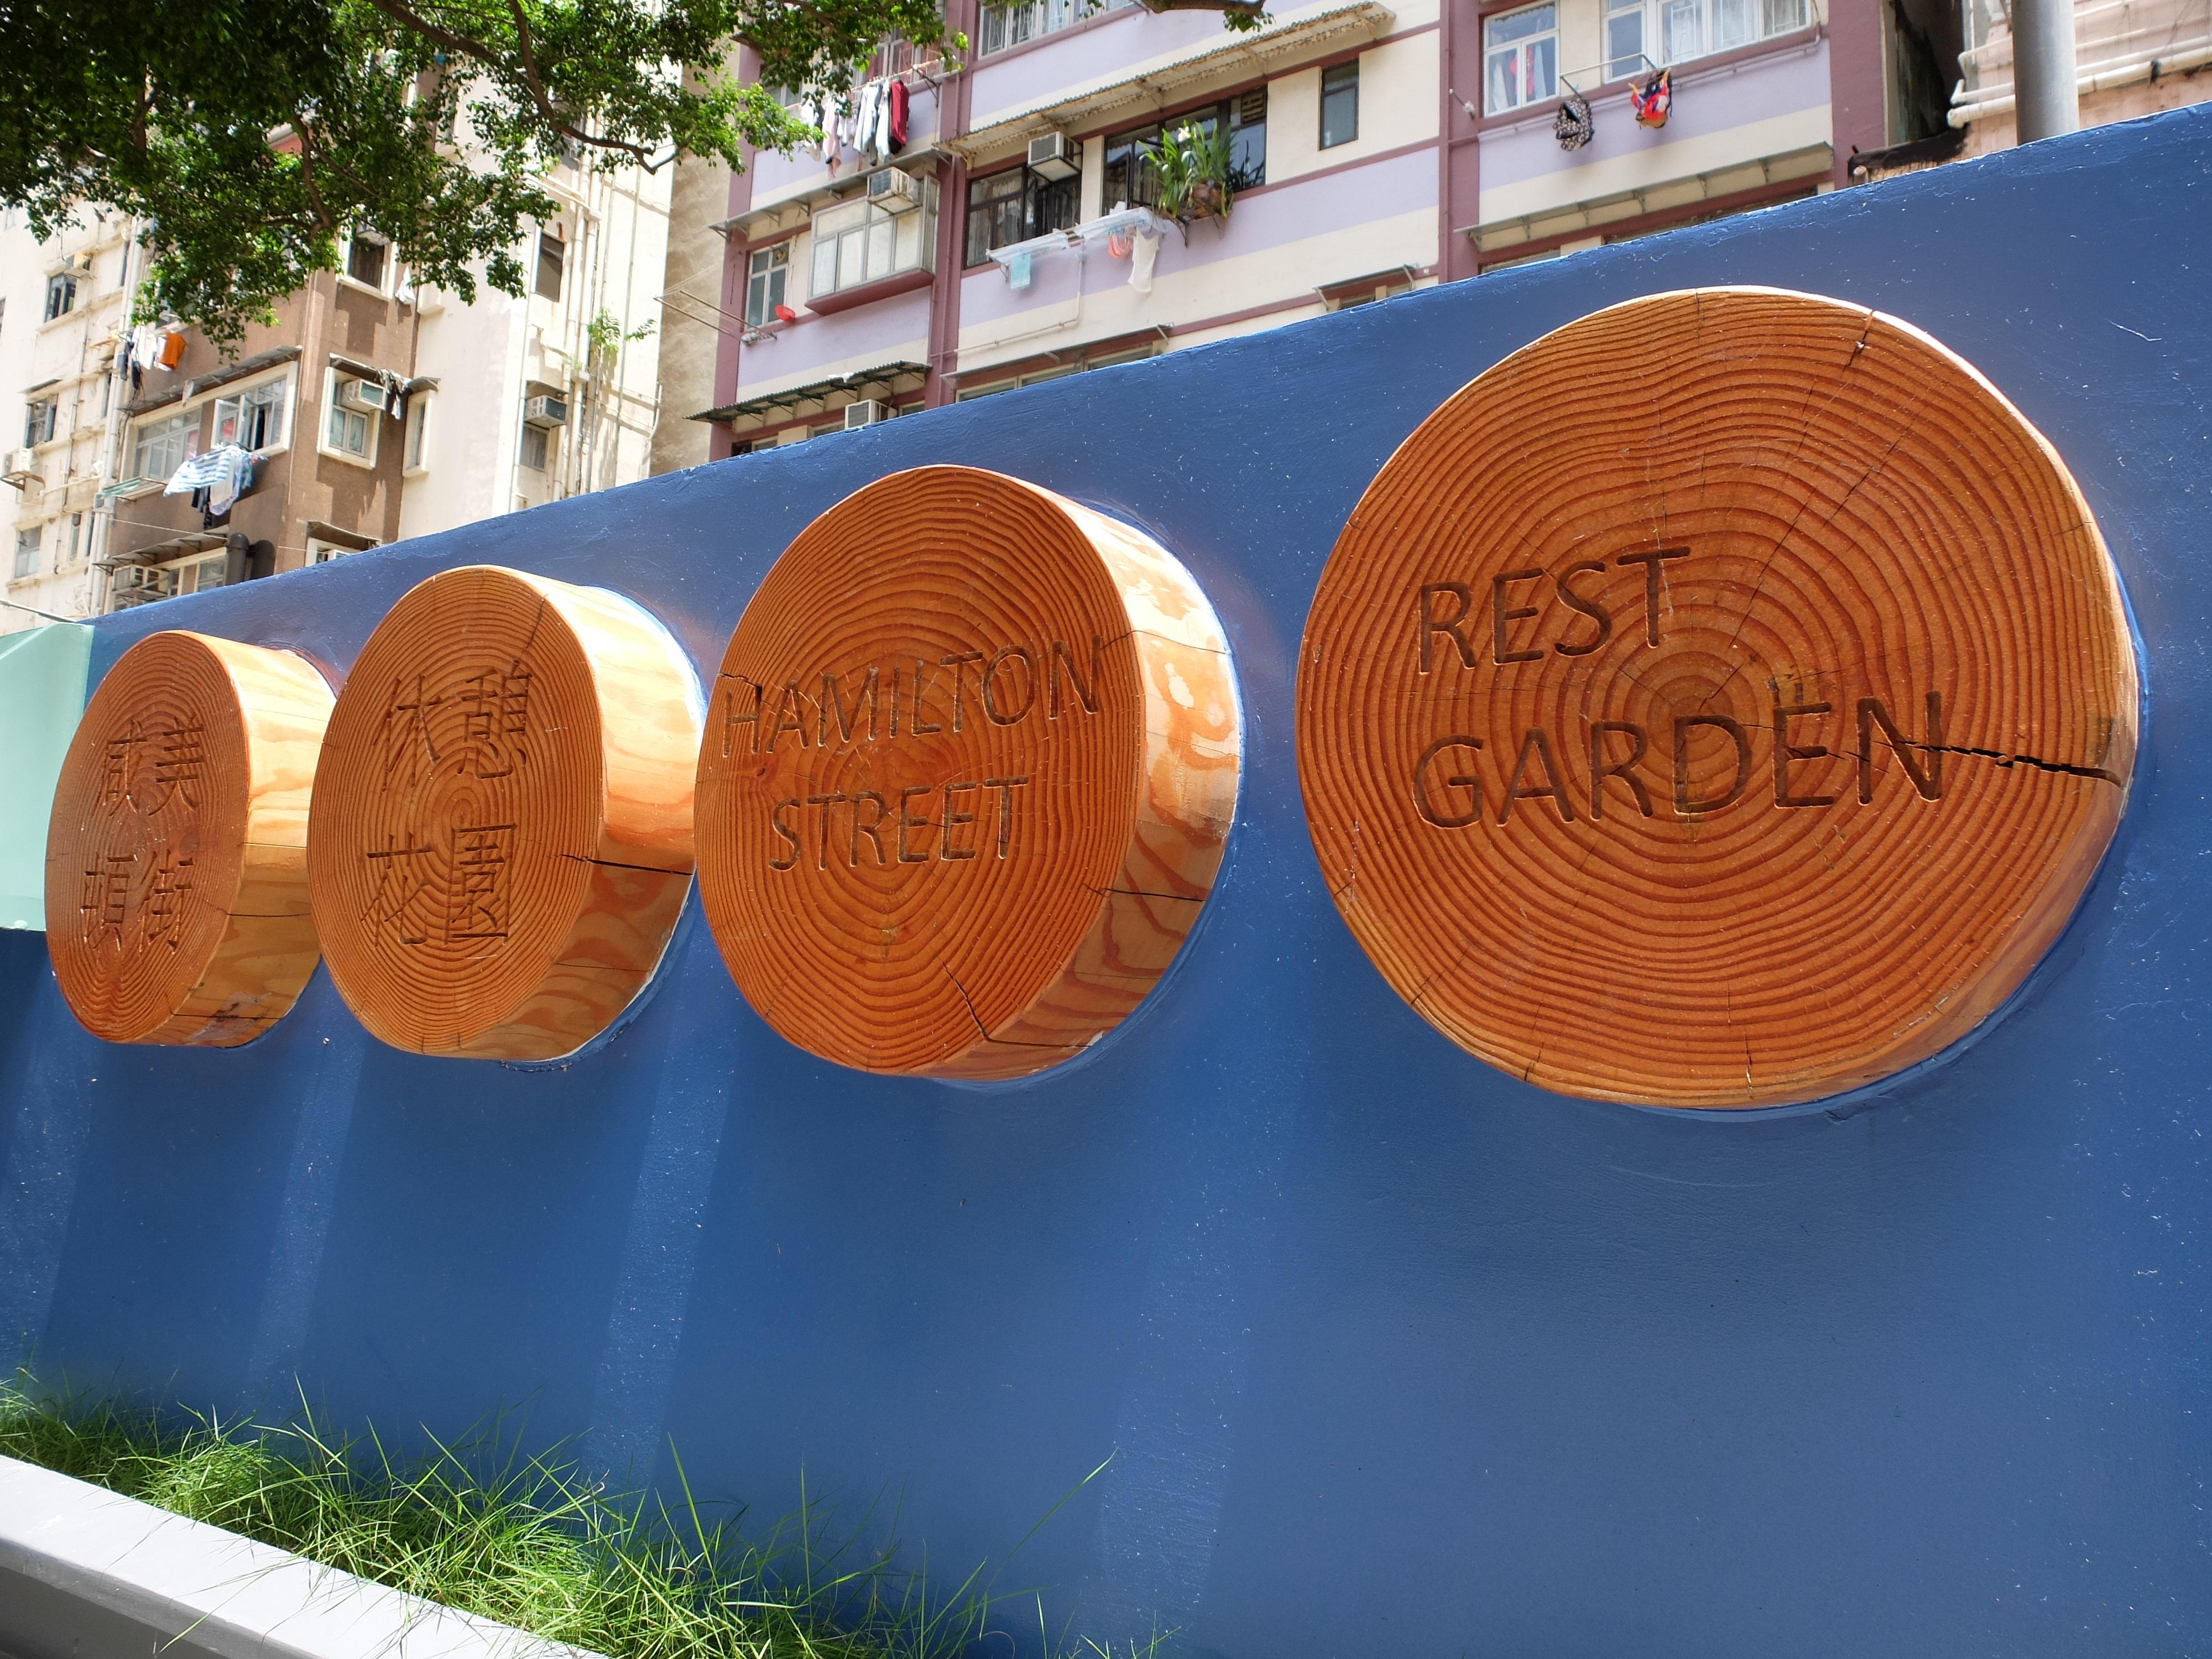 Hamilton Street Rest Garden in Yau Tsim Mong District will reopen tomorrow (July 1) for public use, providing a quality communal space for the local community and other users.